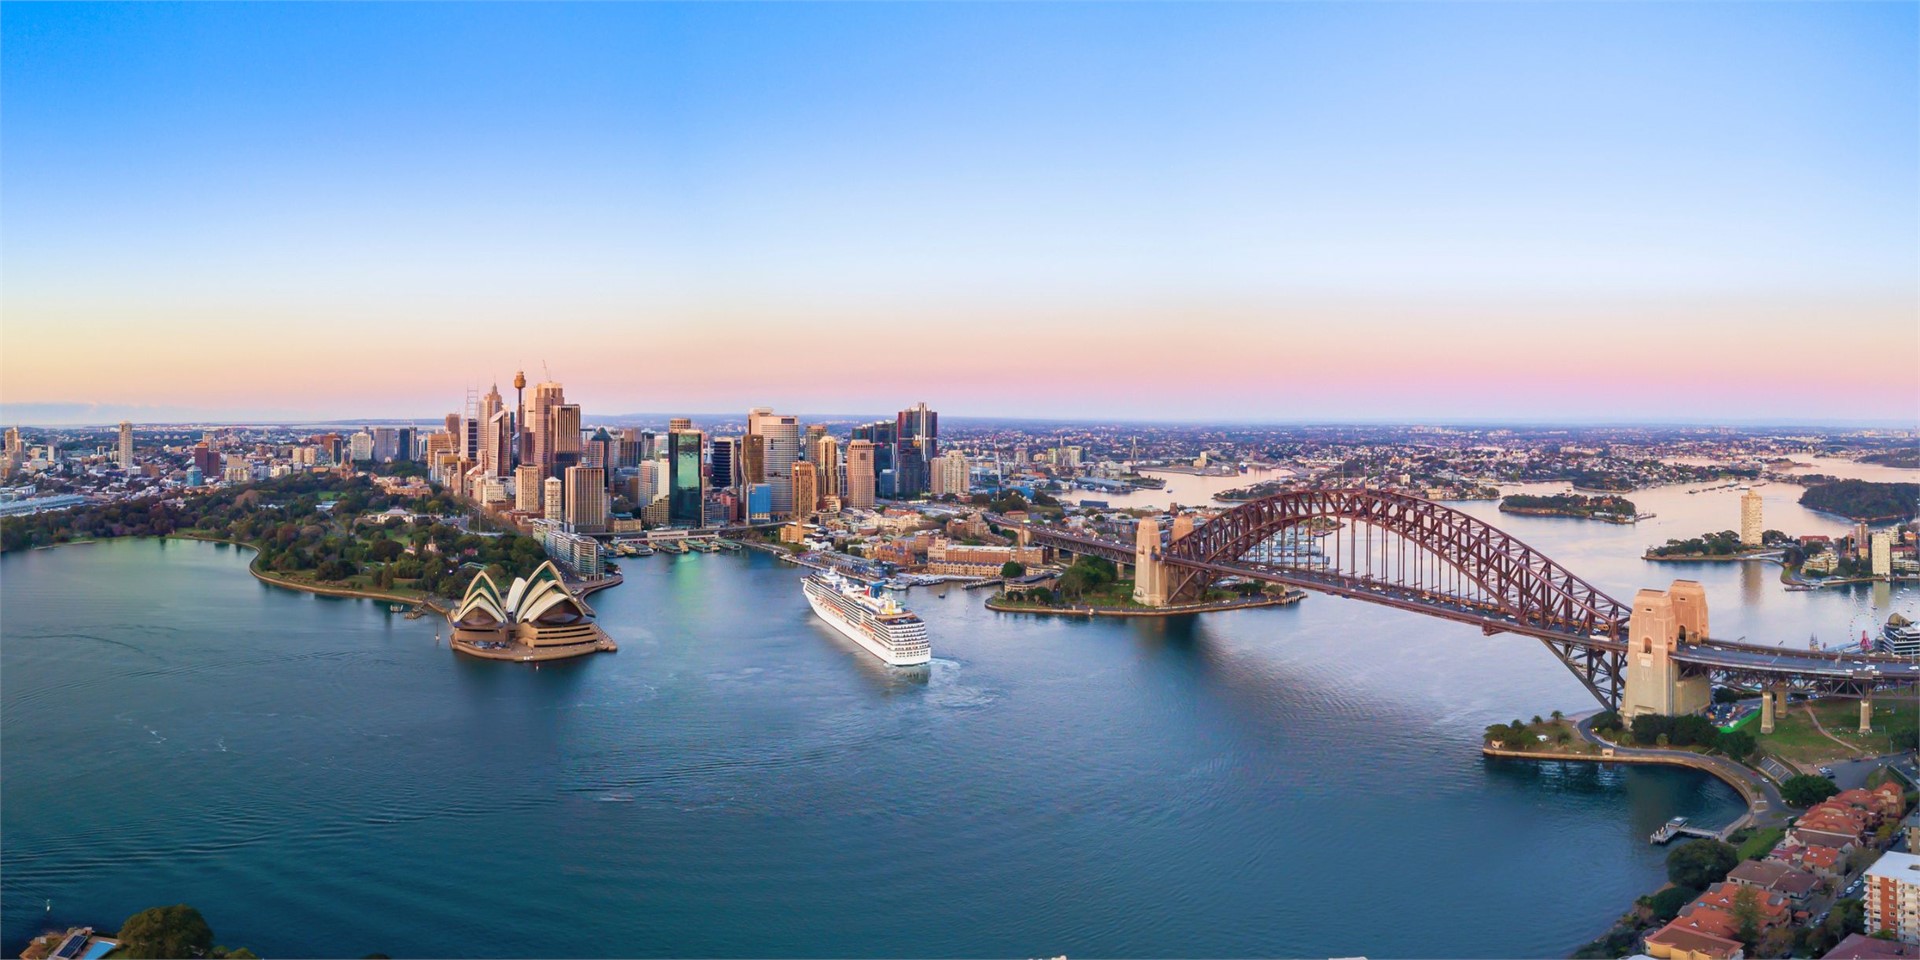 Hotels and accommodation in Sydney, Australia